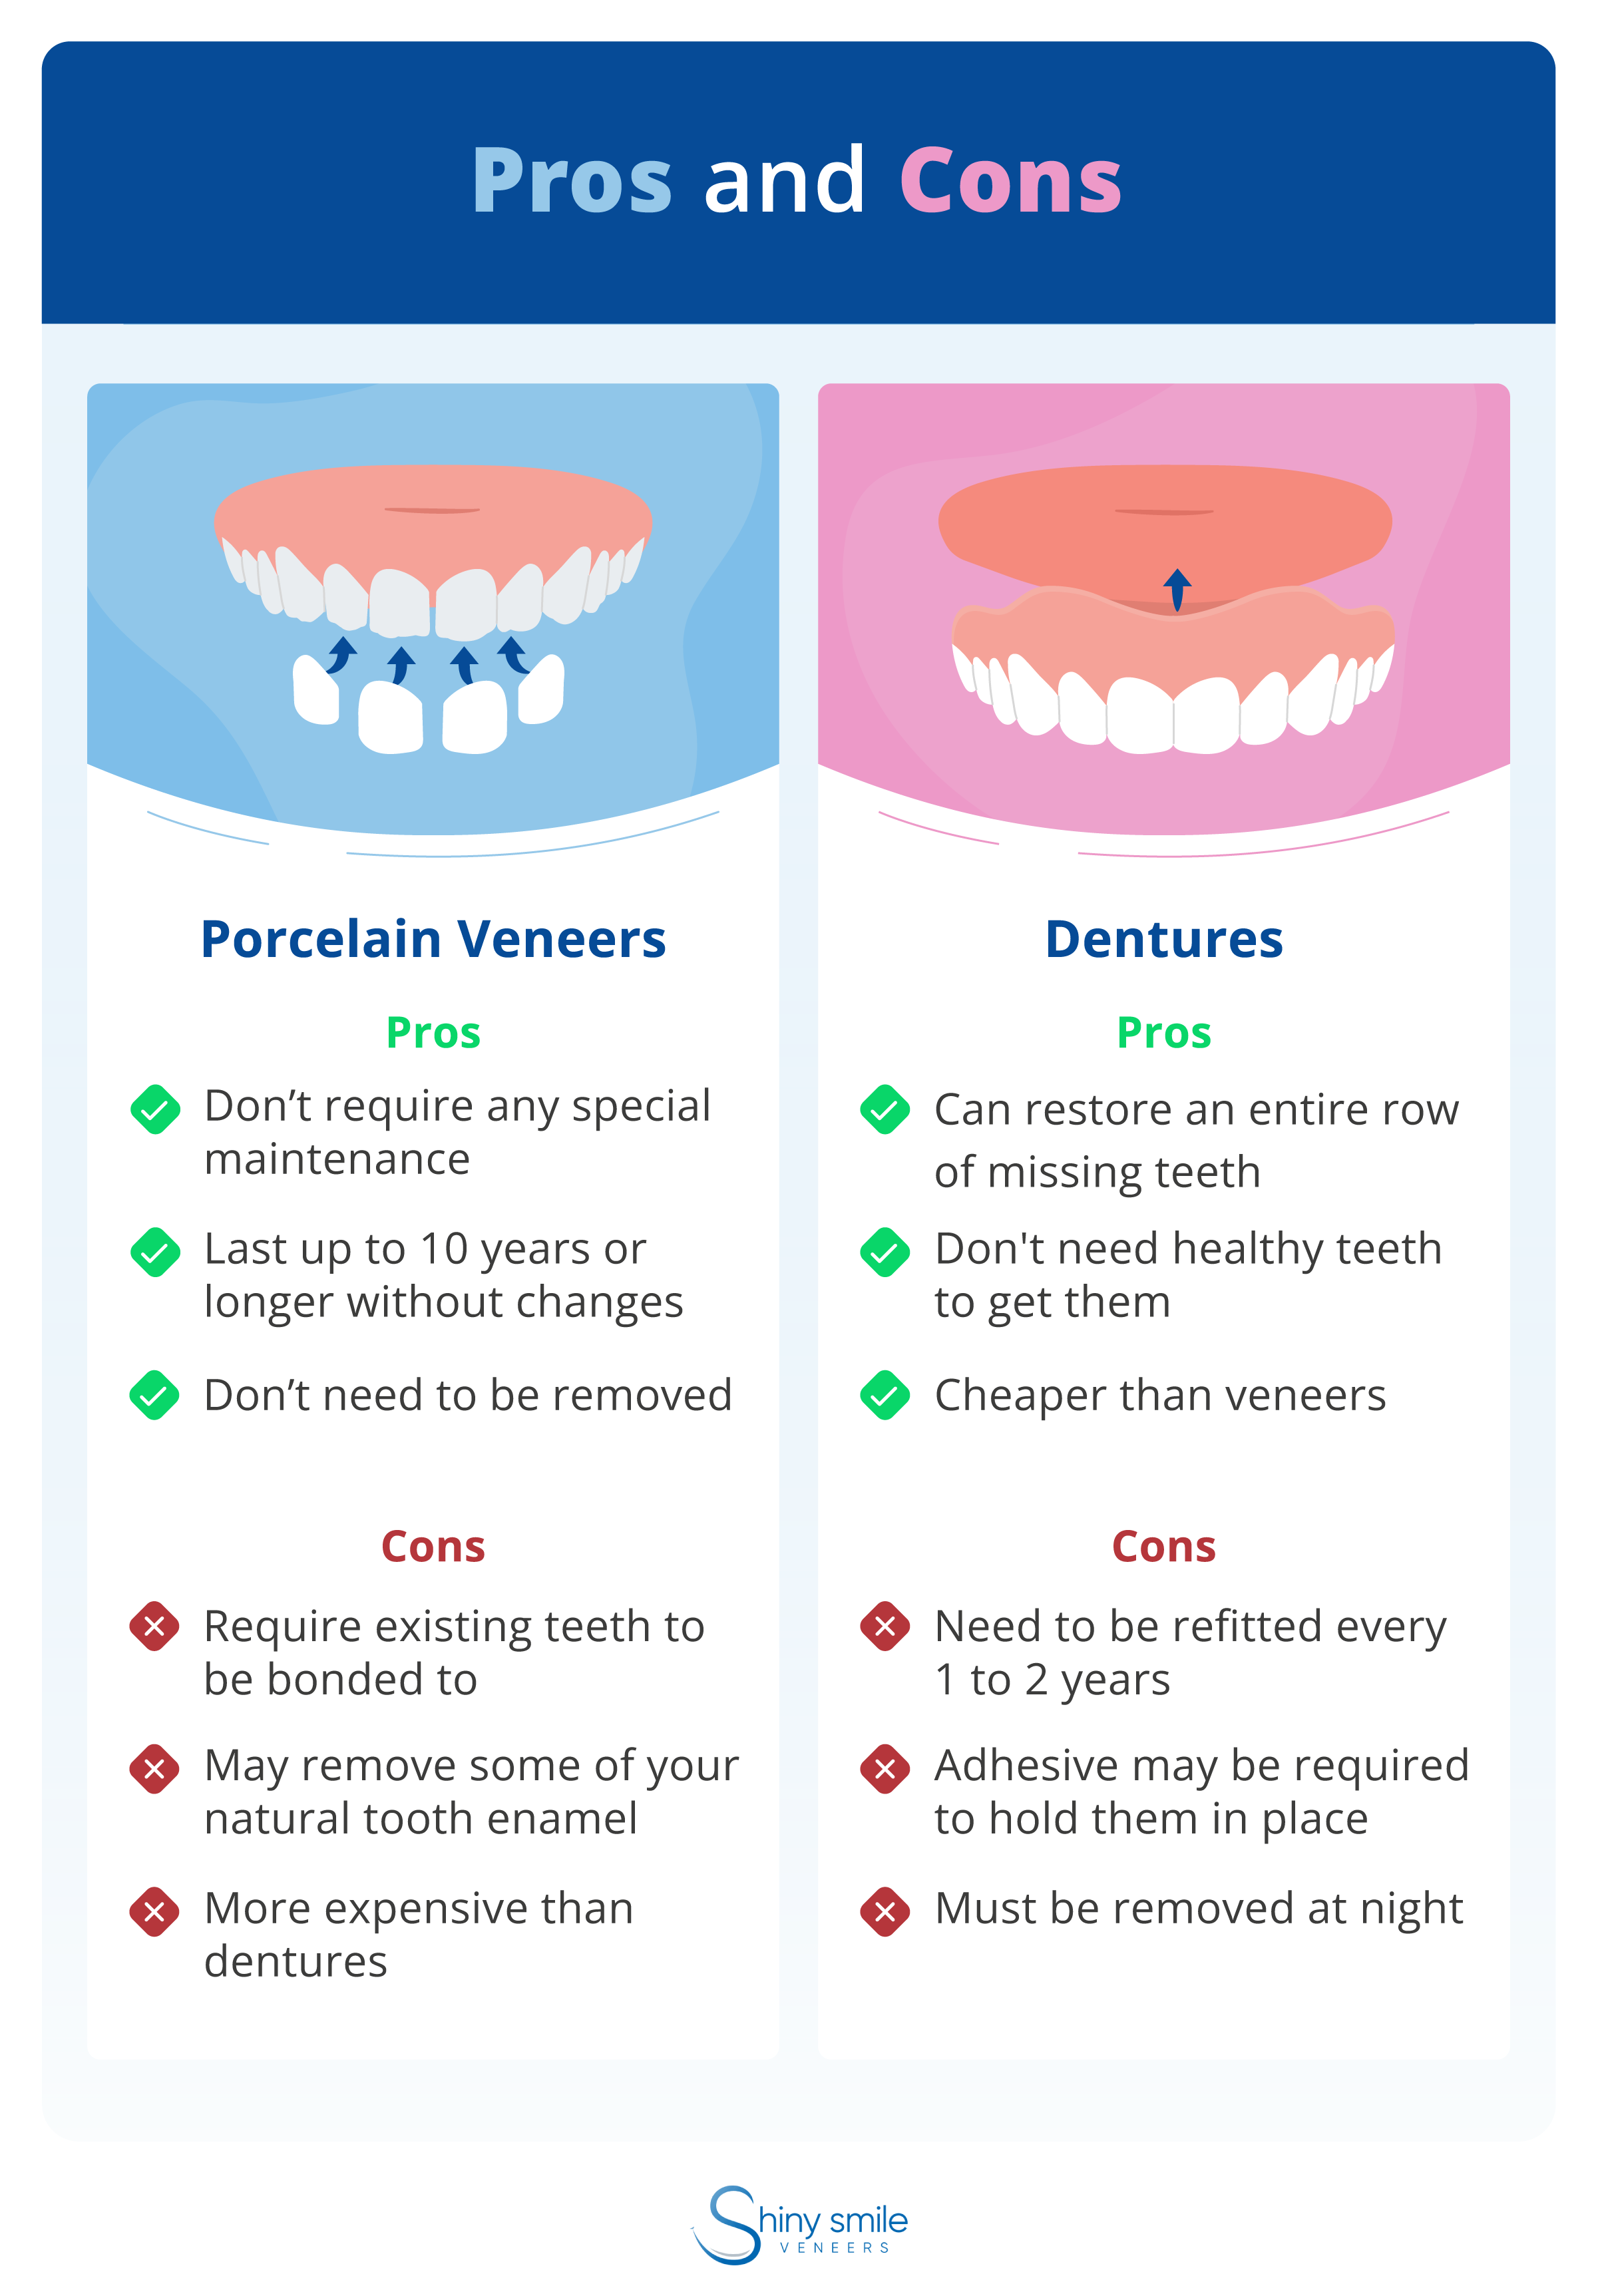 Pros and cons of veneers and dentures